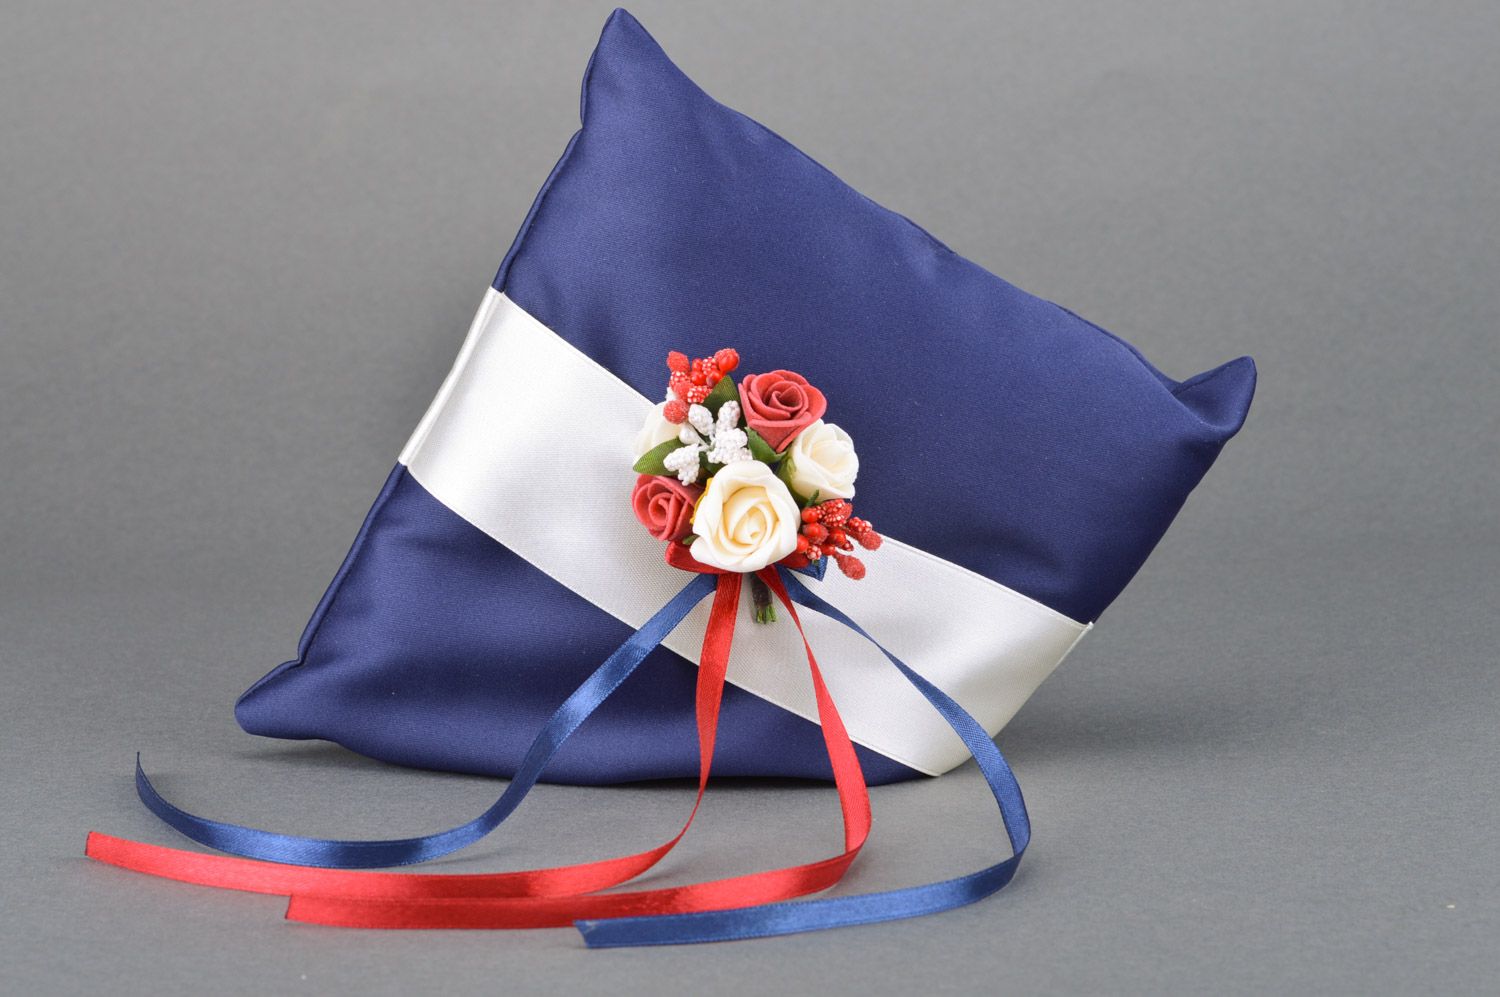 Handmade blue wedding ring pillow made of fabric with flowers and ribbons photo 2